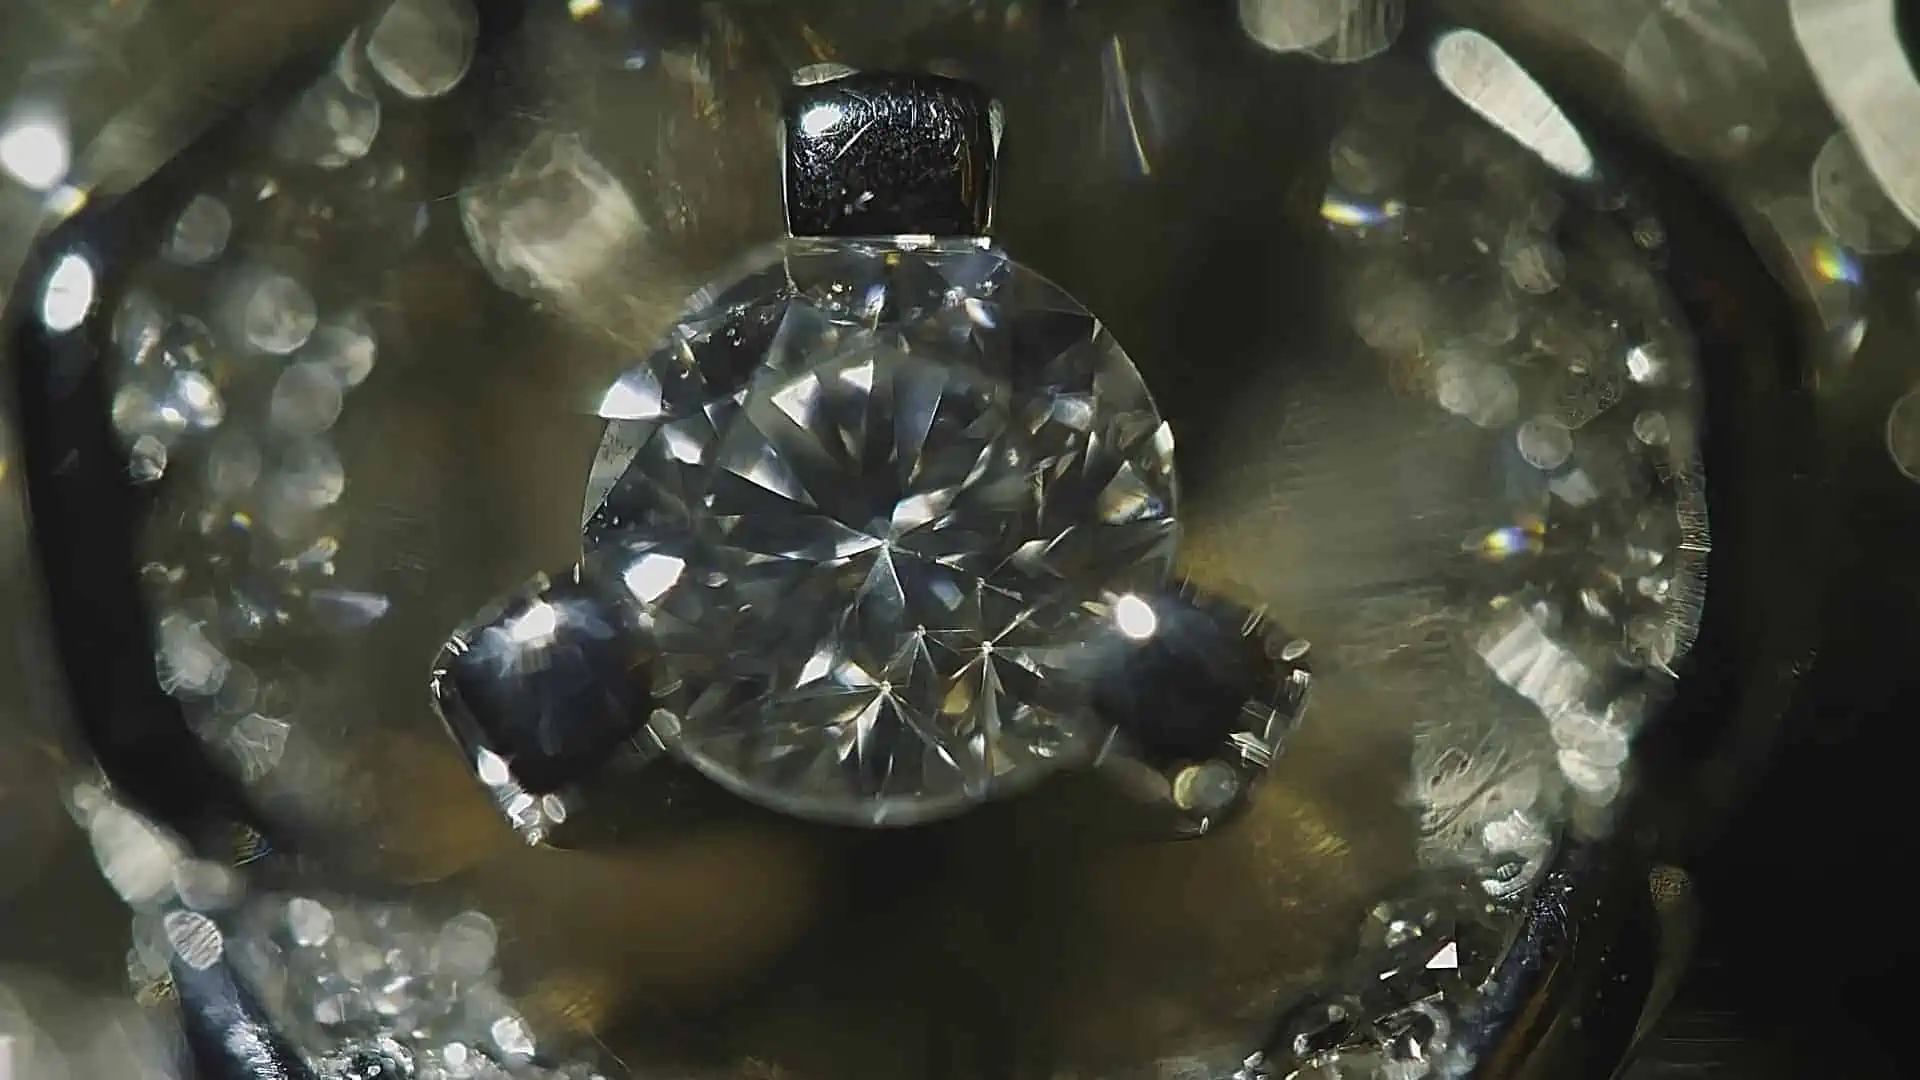 diamond under a magnifying glass to check if it's real diamond or fake diamond